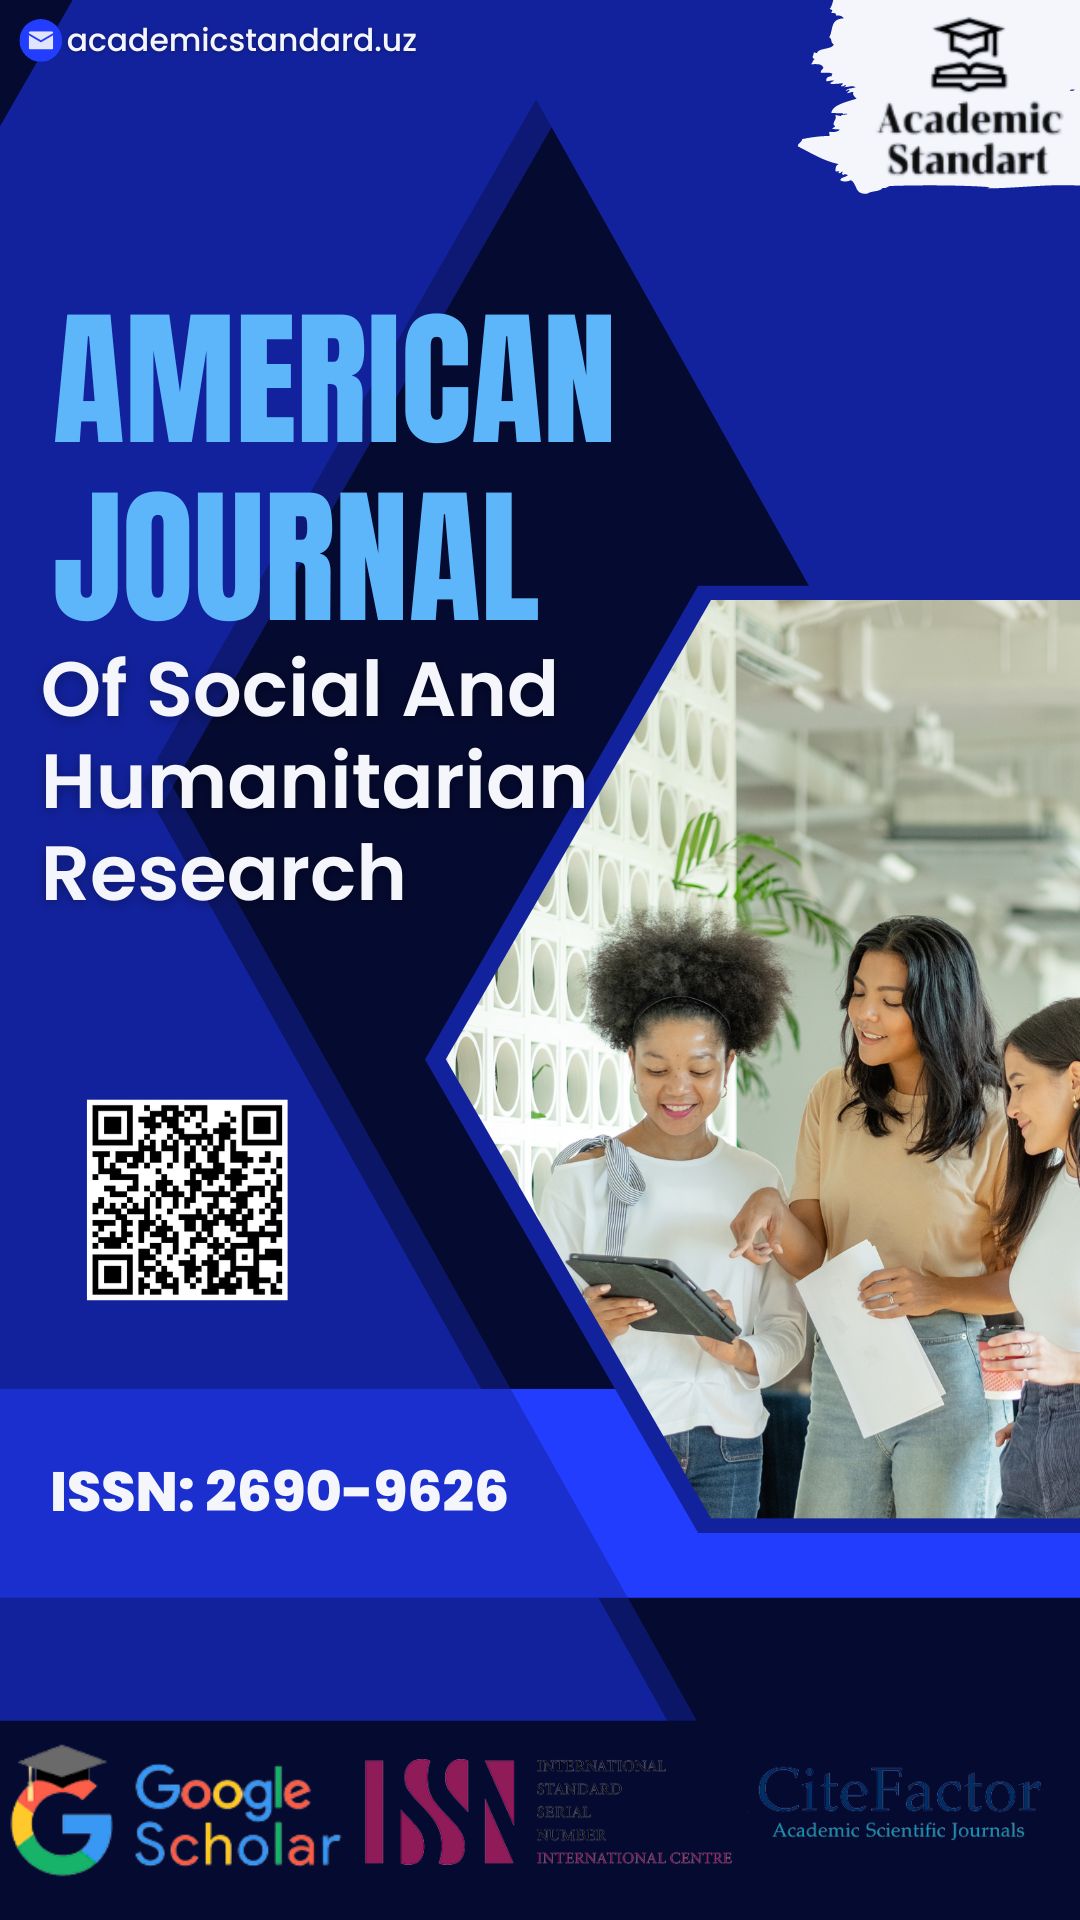 American Journal of Social and Humanitarian Research